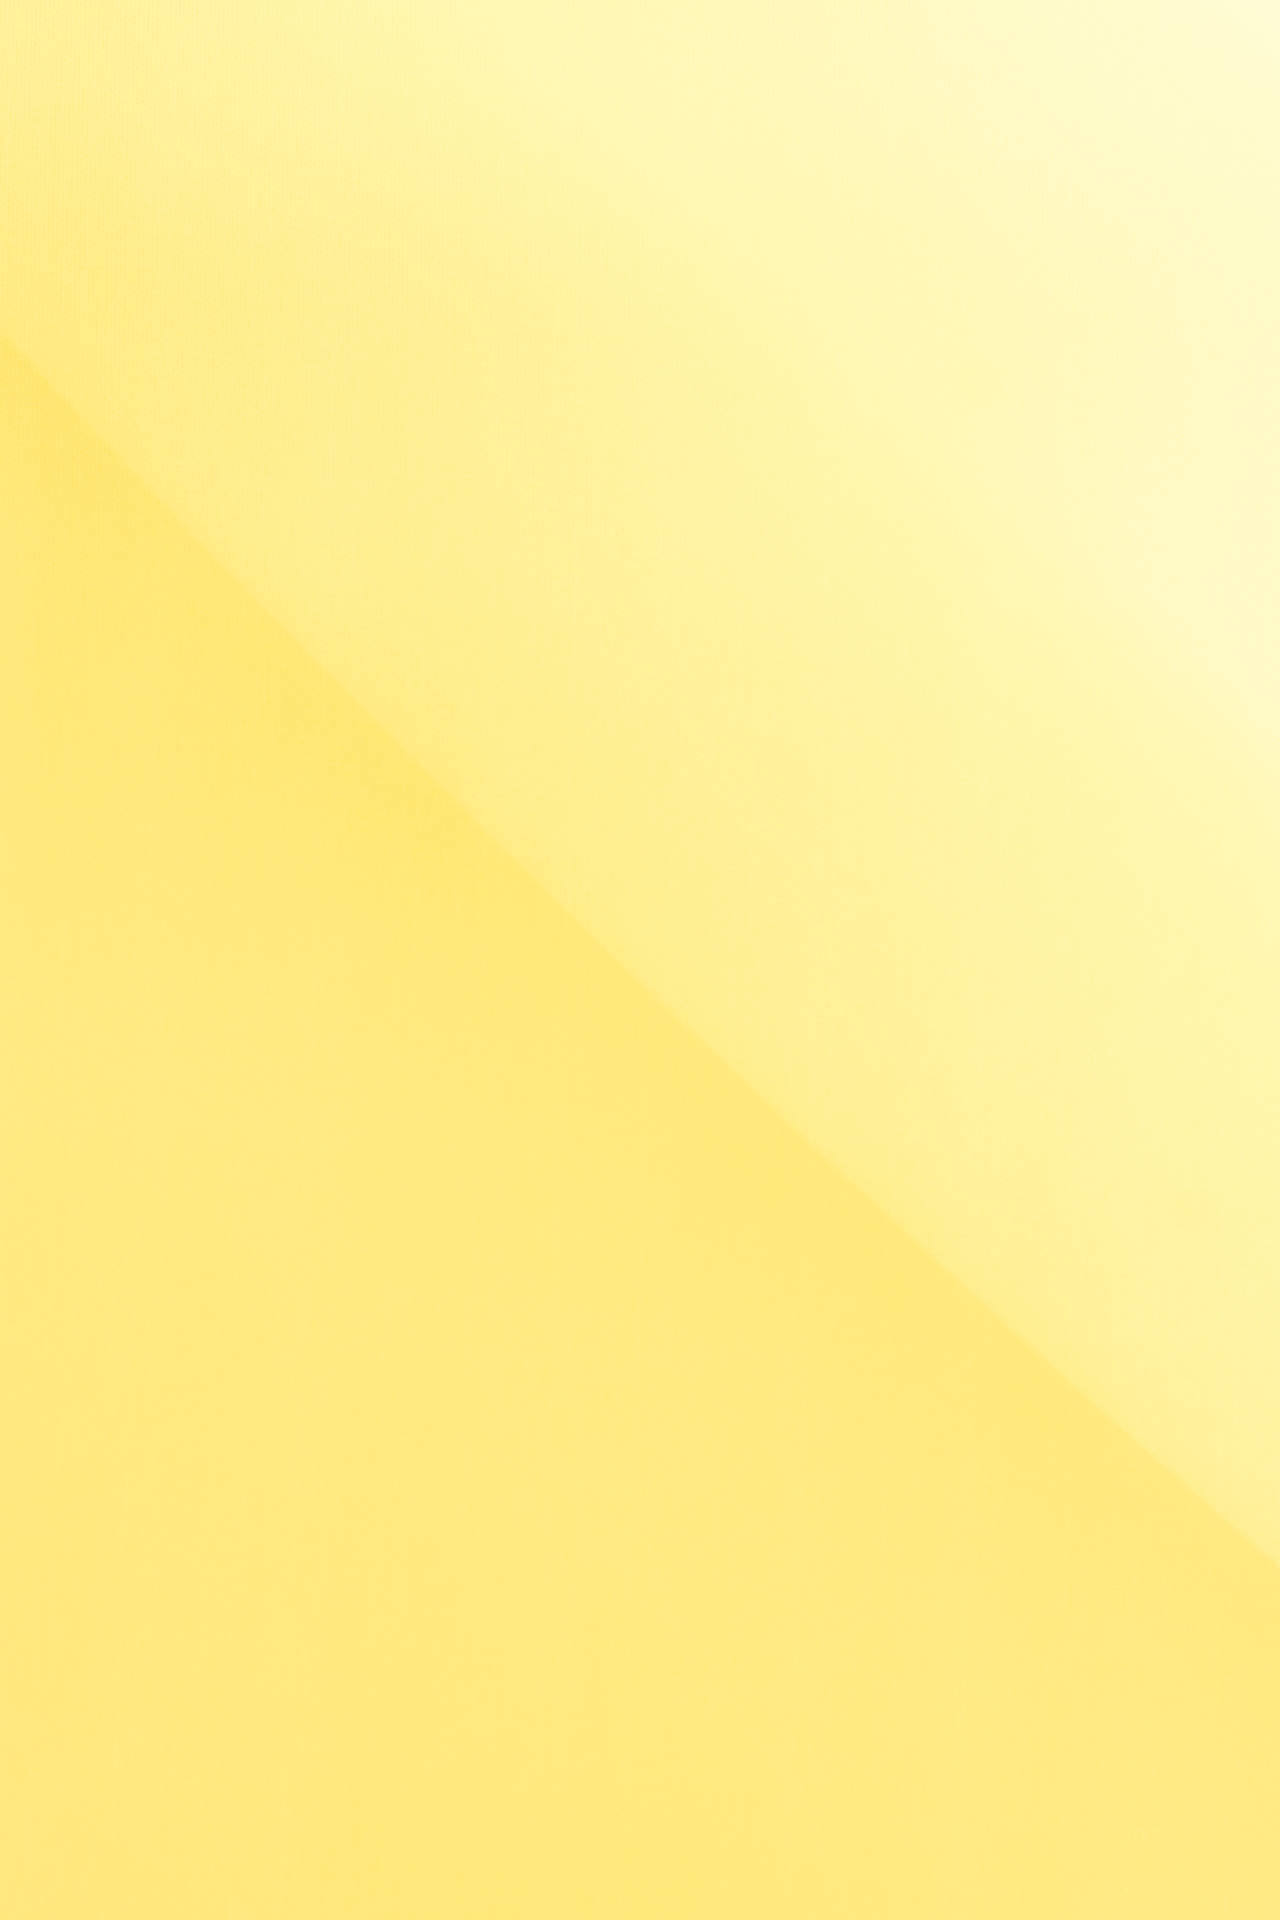 3461X5192 Yellow Wallpaper and Background